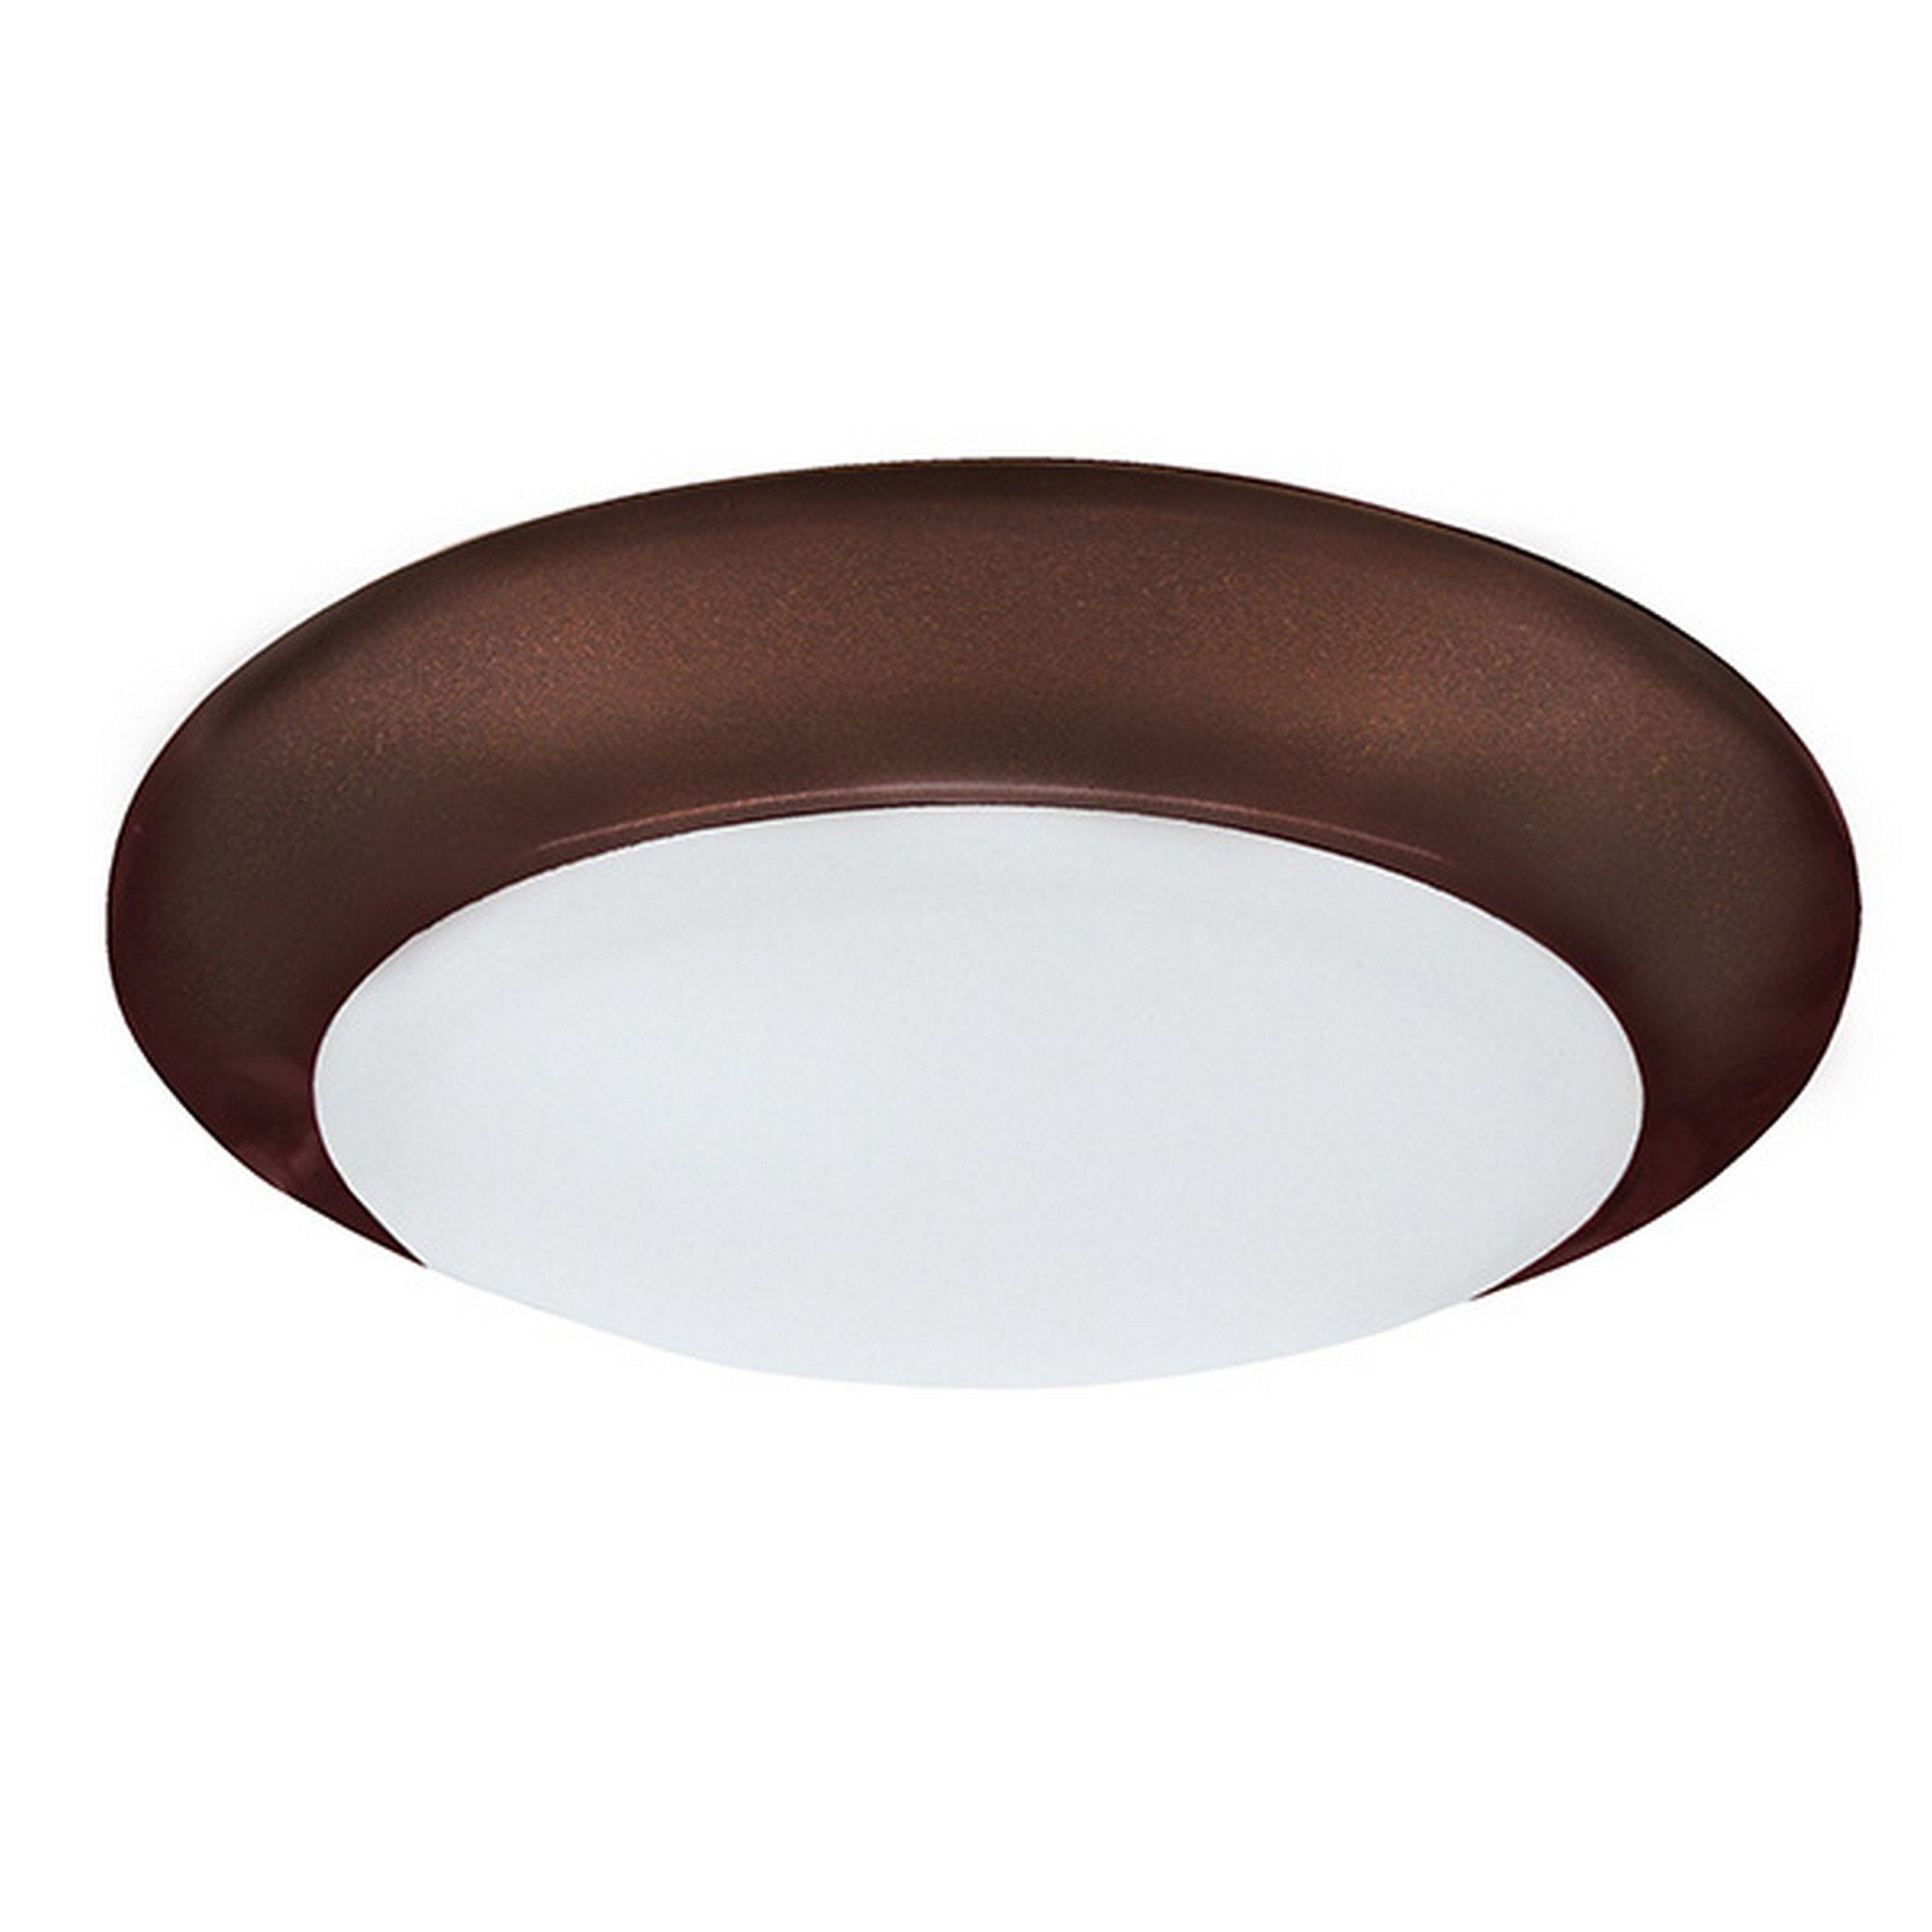 LED 6" Wide Low Profile Disc Light - Oil Rubbed Bronze Ceiling 7th Sky Design 